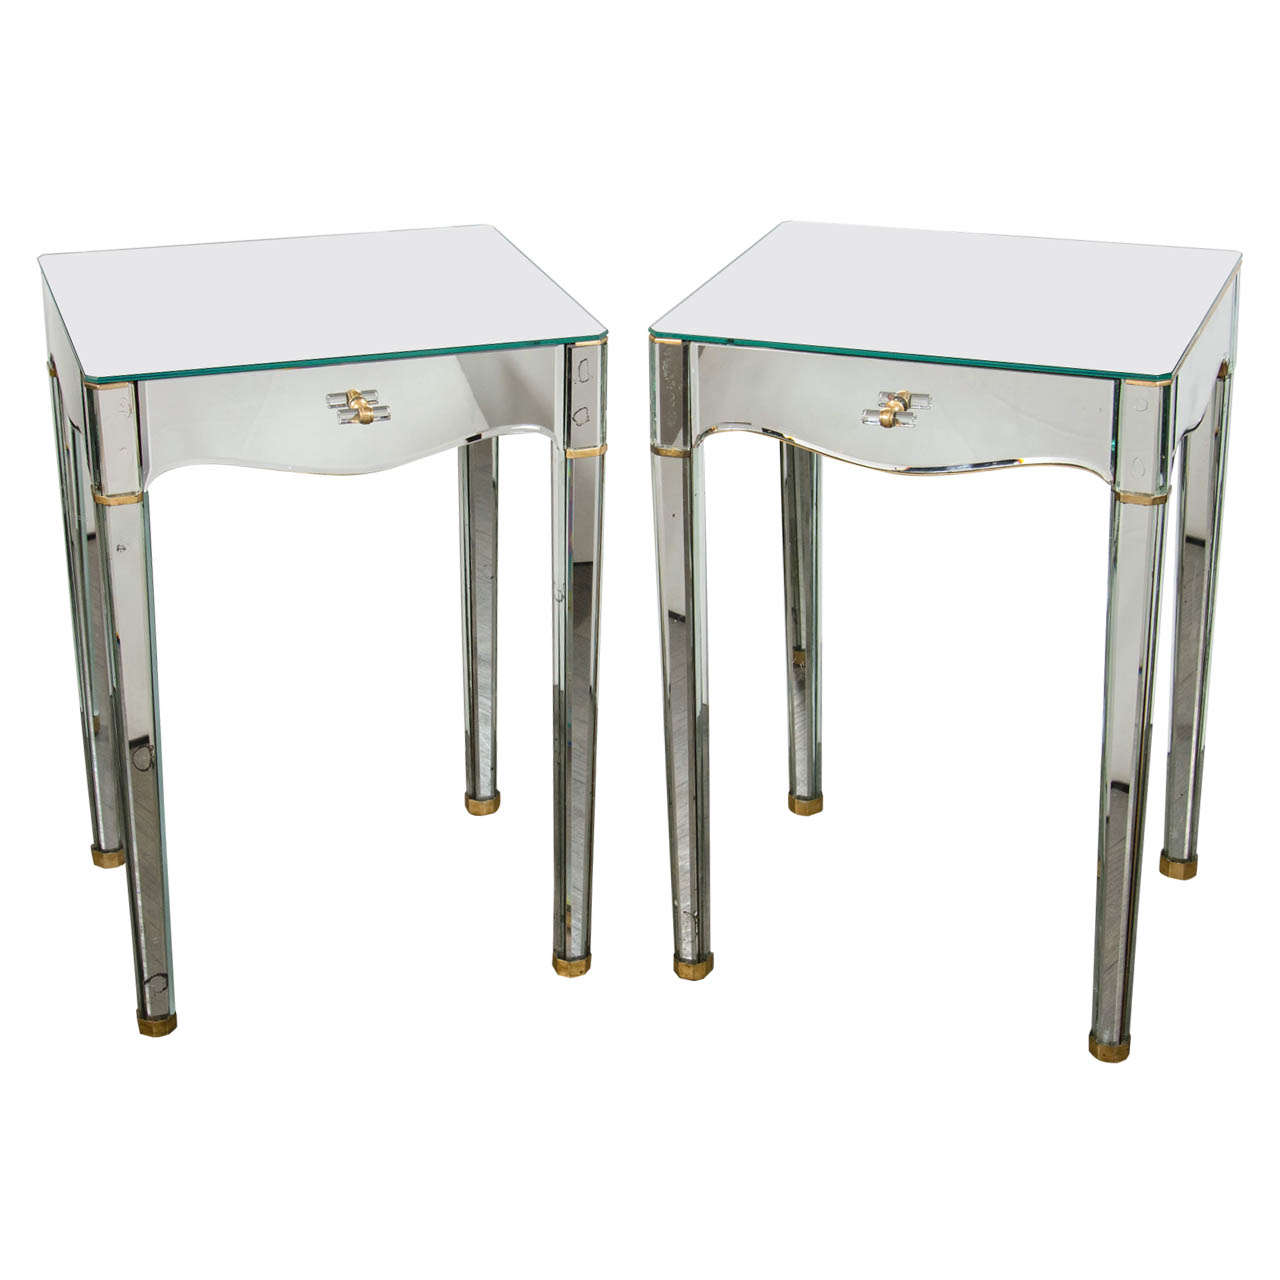 Stunning Pair of Art Deco Directoire Style Mirrored Night Stands / End Tables